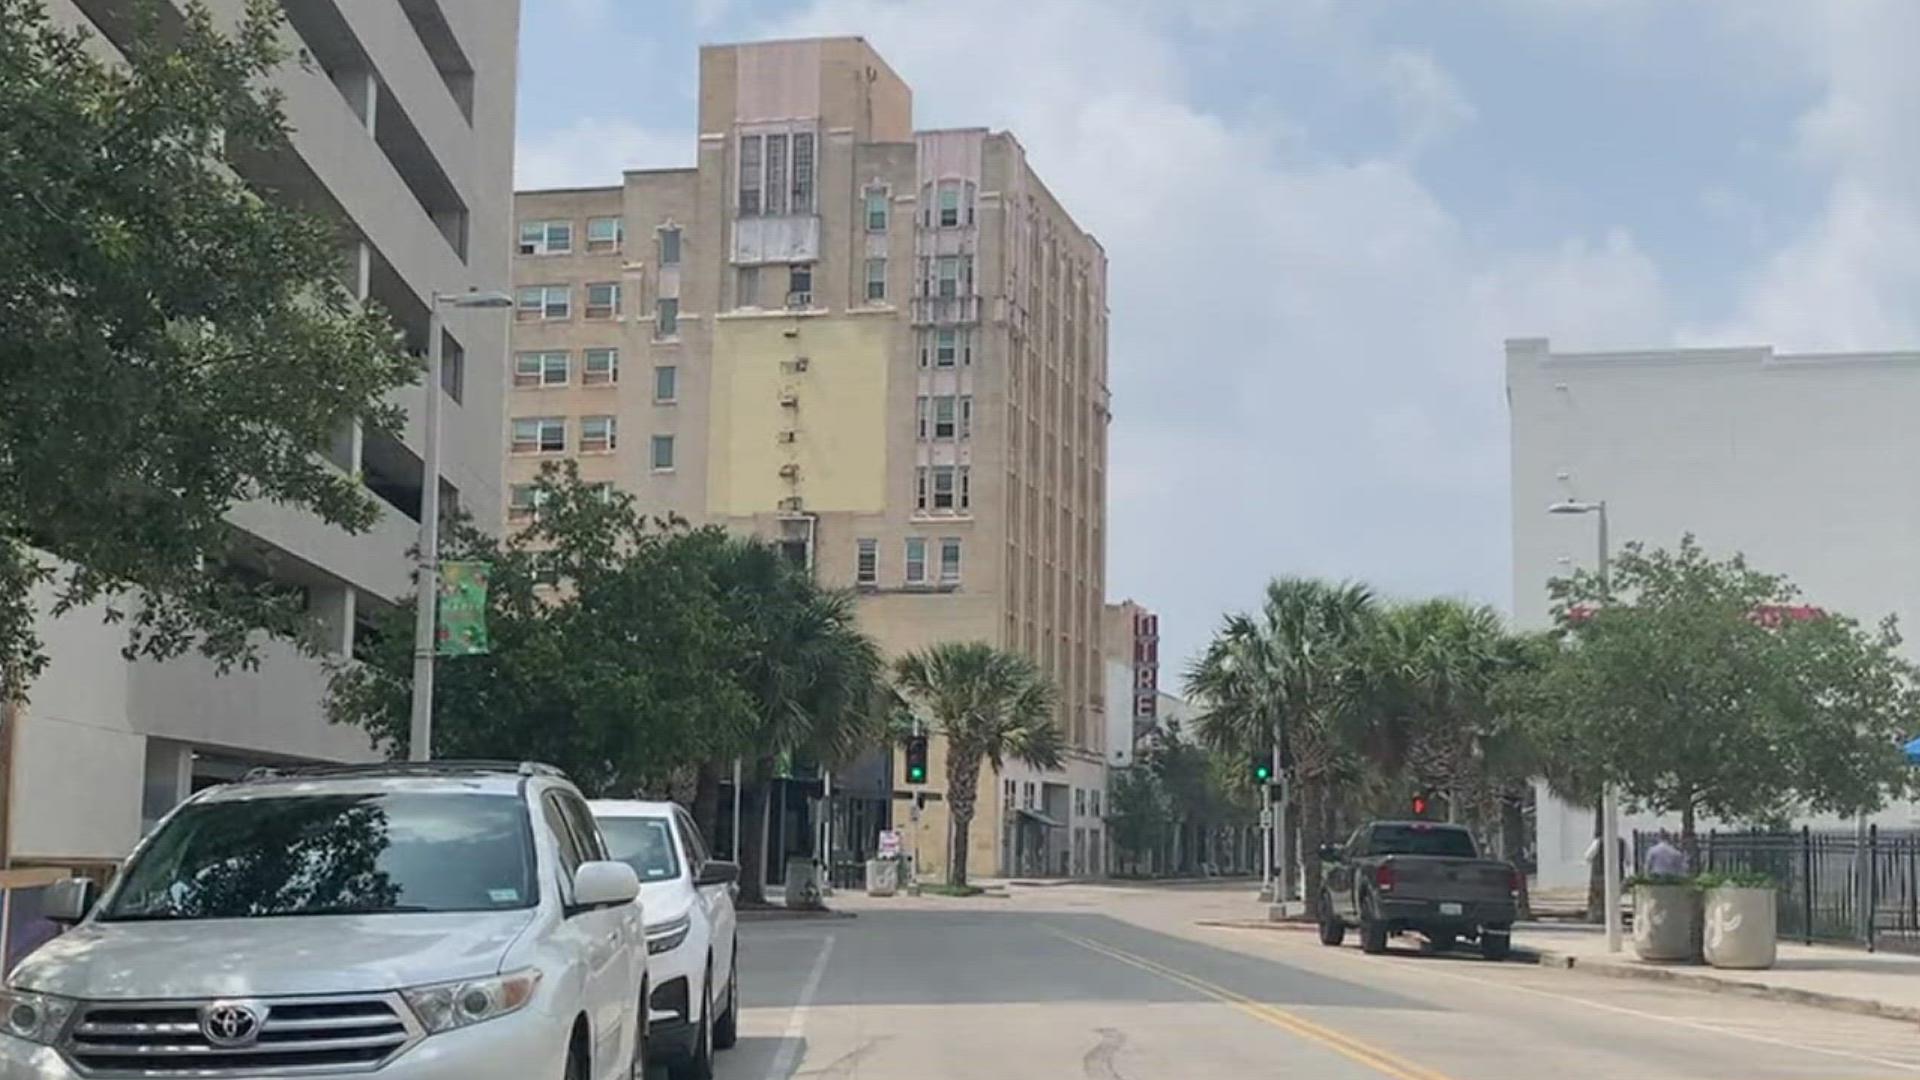 A developer from Nevada is going to revamp the Bayfront Hotel and an Austin-based developer is also about to spend millions to renovate the Pope Building.